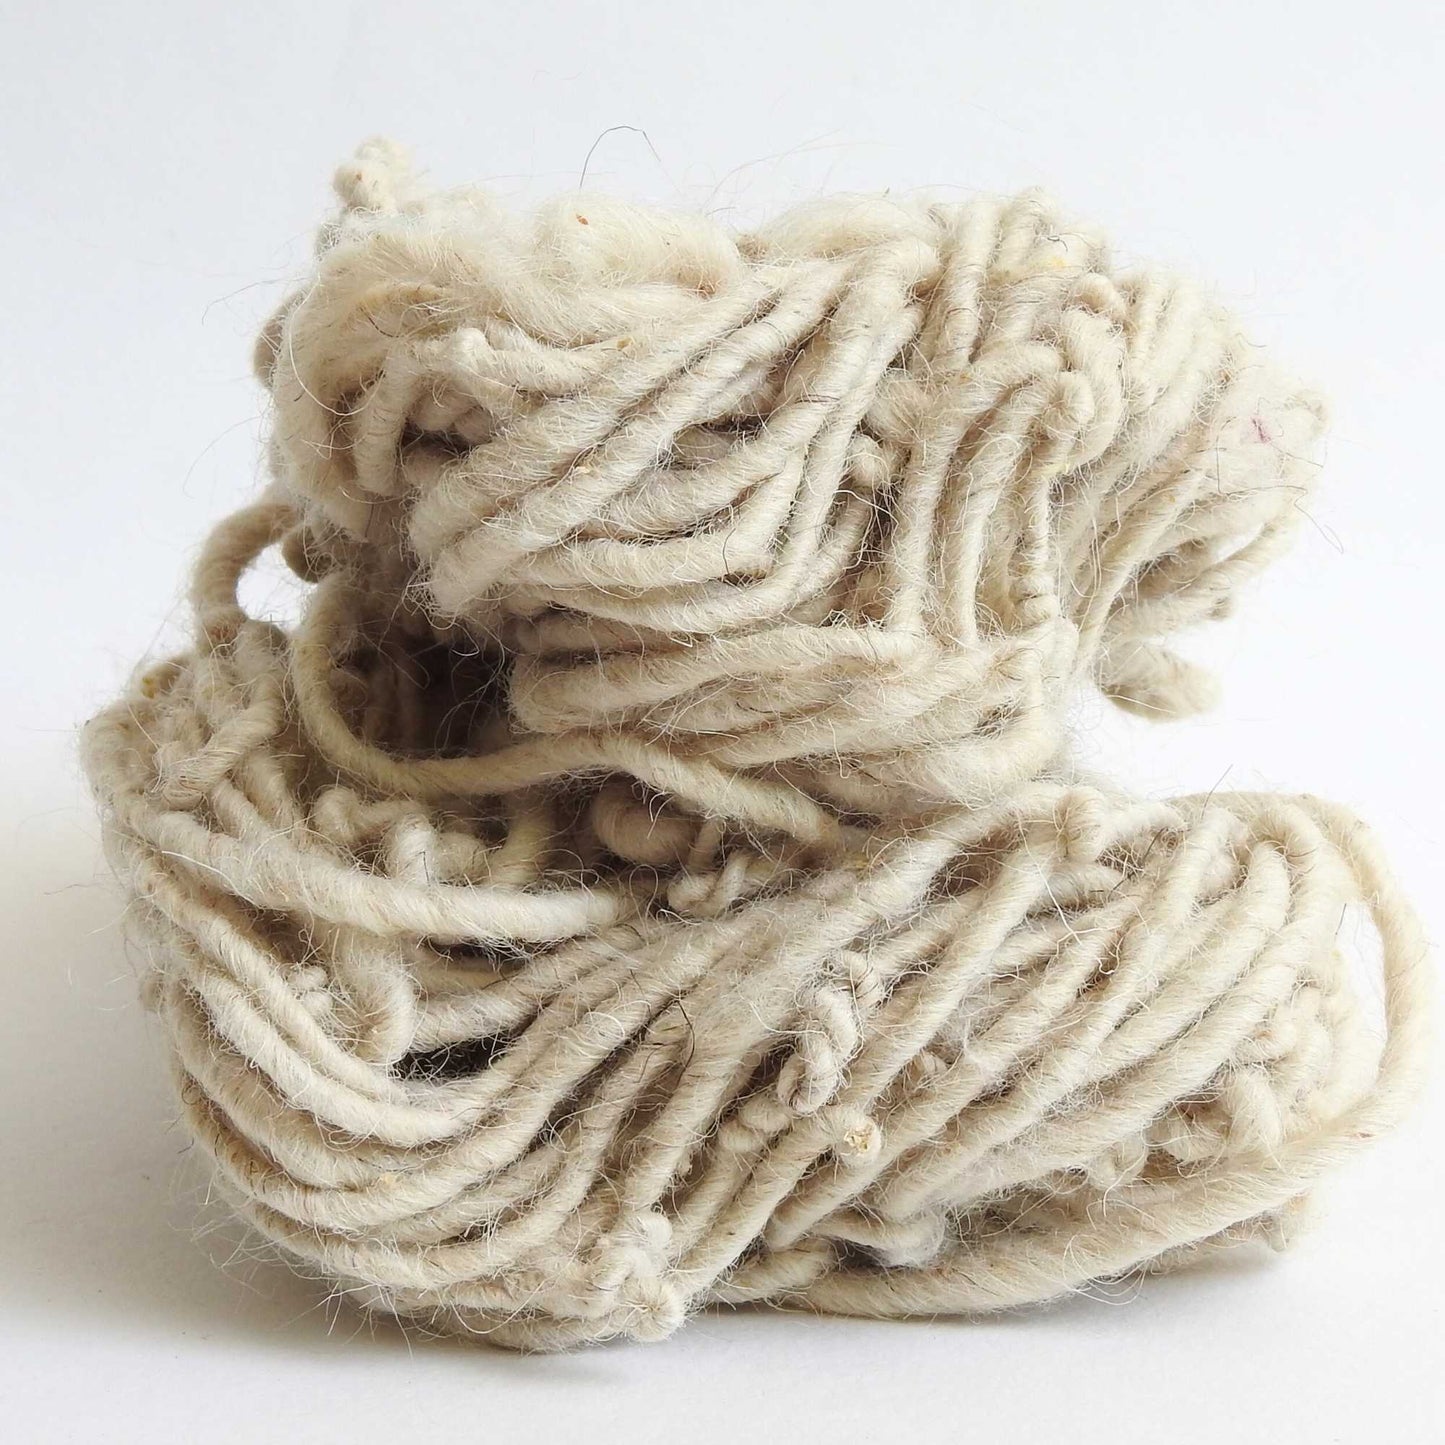 Felted wool yarn with over spin for texture. Lightly felted. Natural New Zealand wool. Use for weaving, macrame, baskets, hats. textile arts, dyeing.